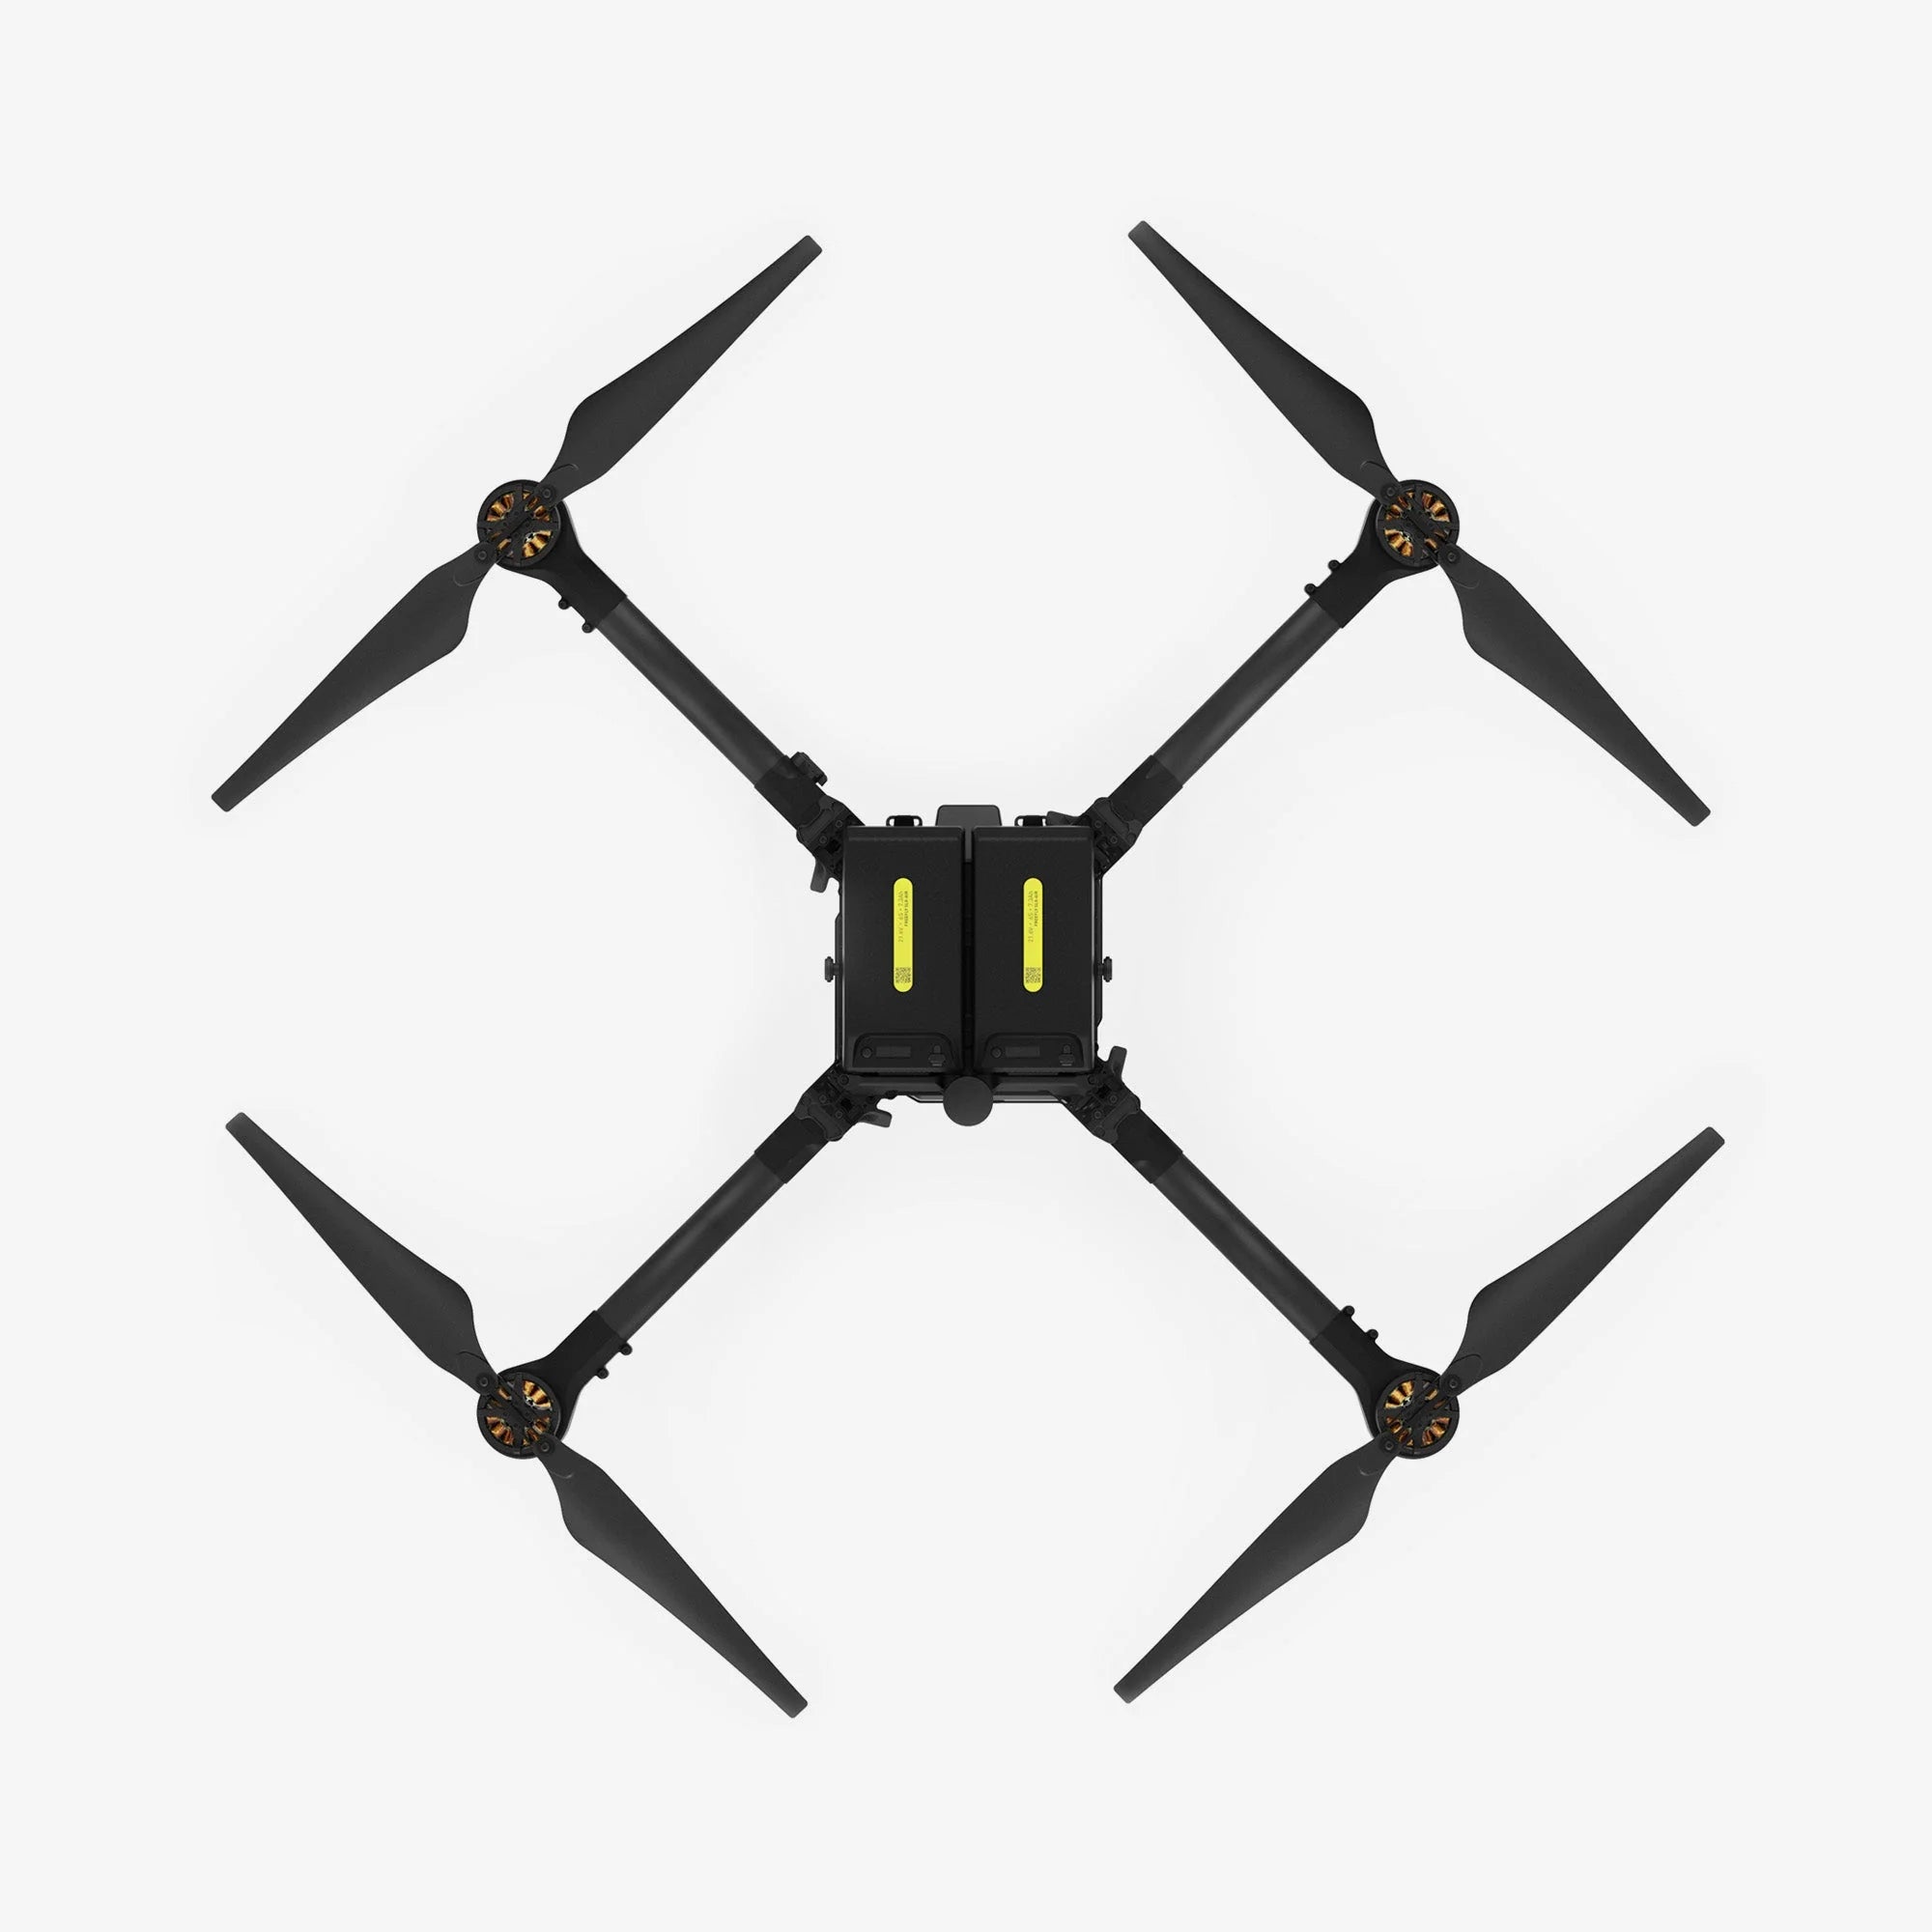 Freefly Astro (NDAA/Blue) Drone Only